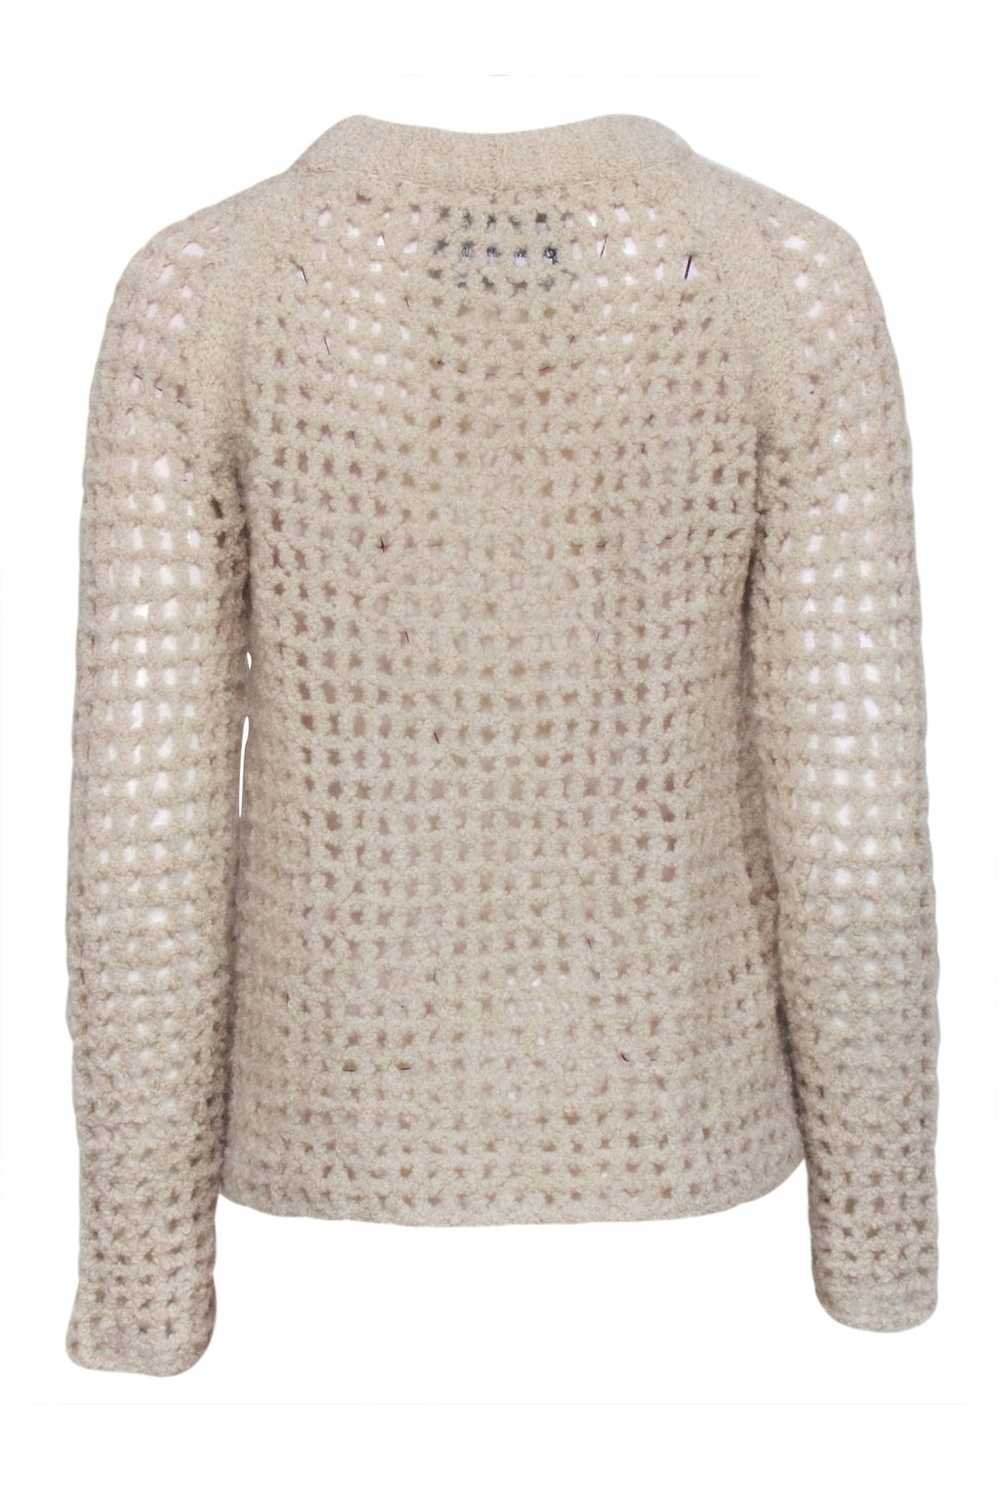 Zadig & Voltaire - Beige Chunky Knit Crewneck Swe… - image 3